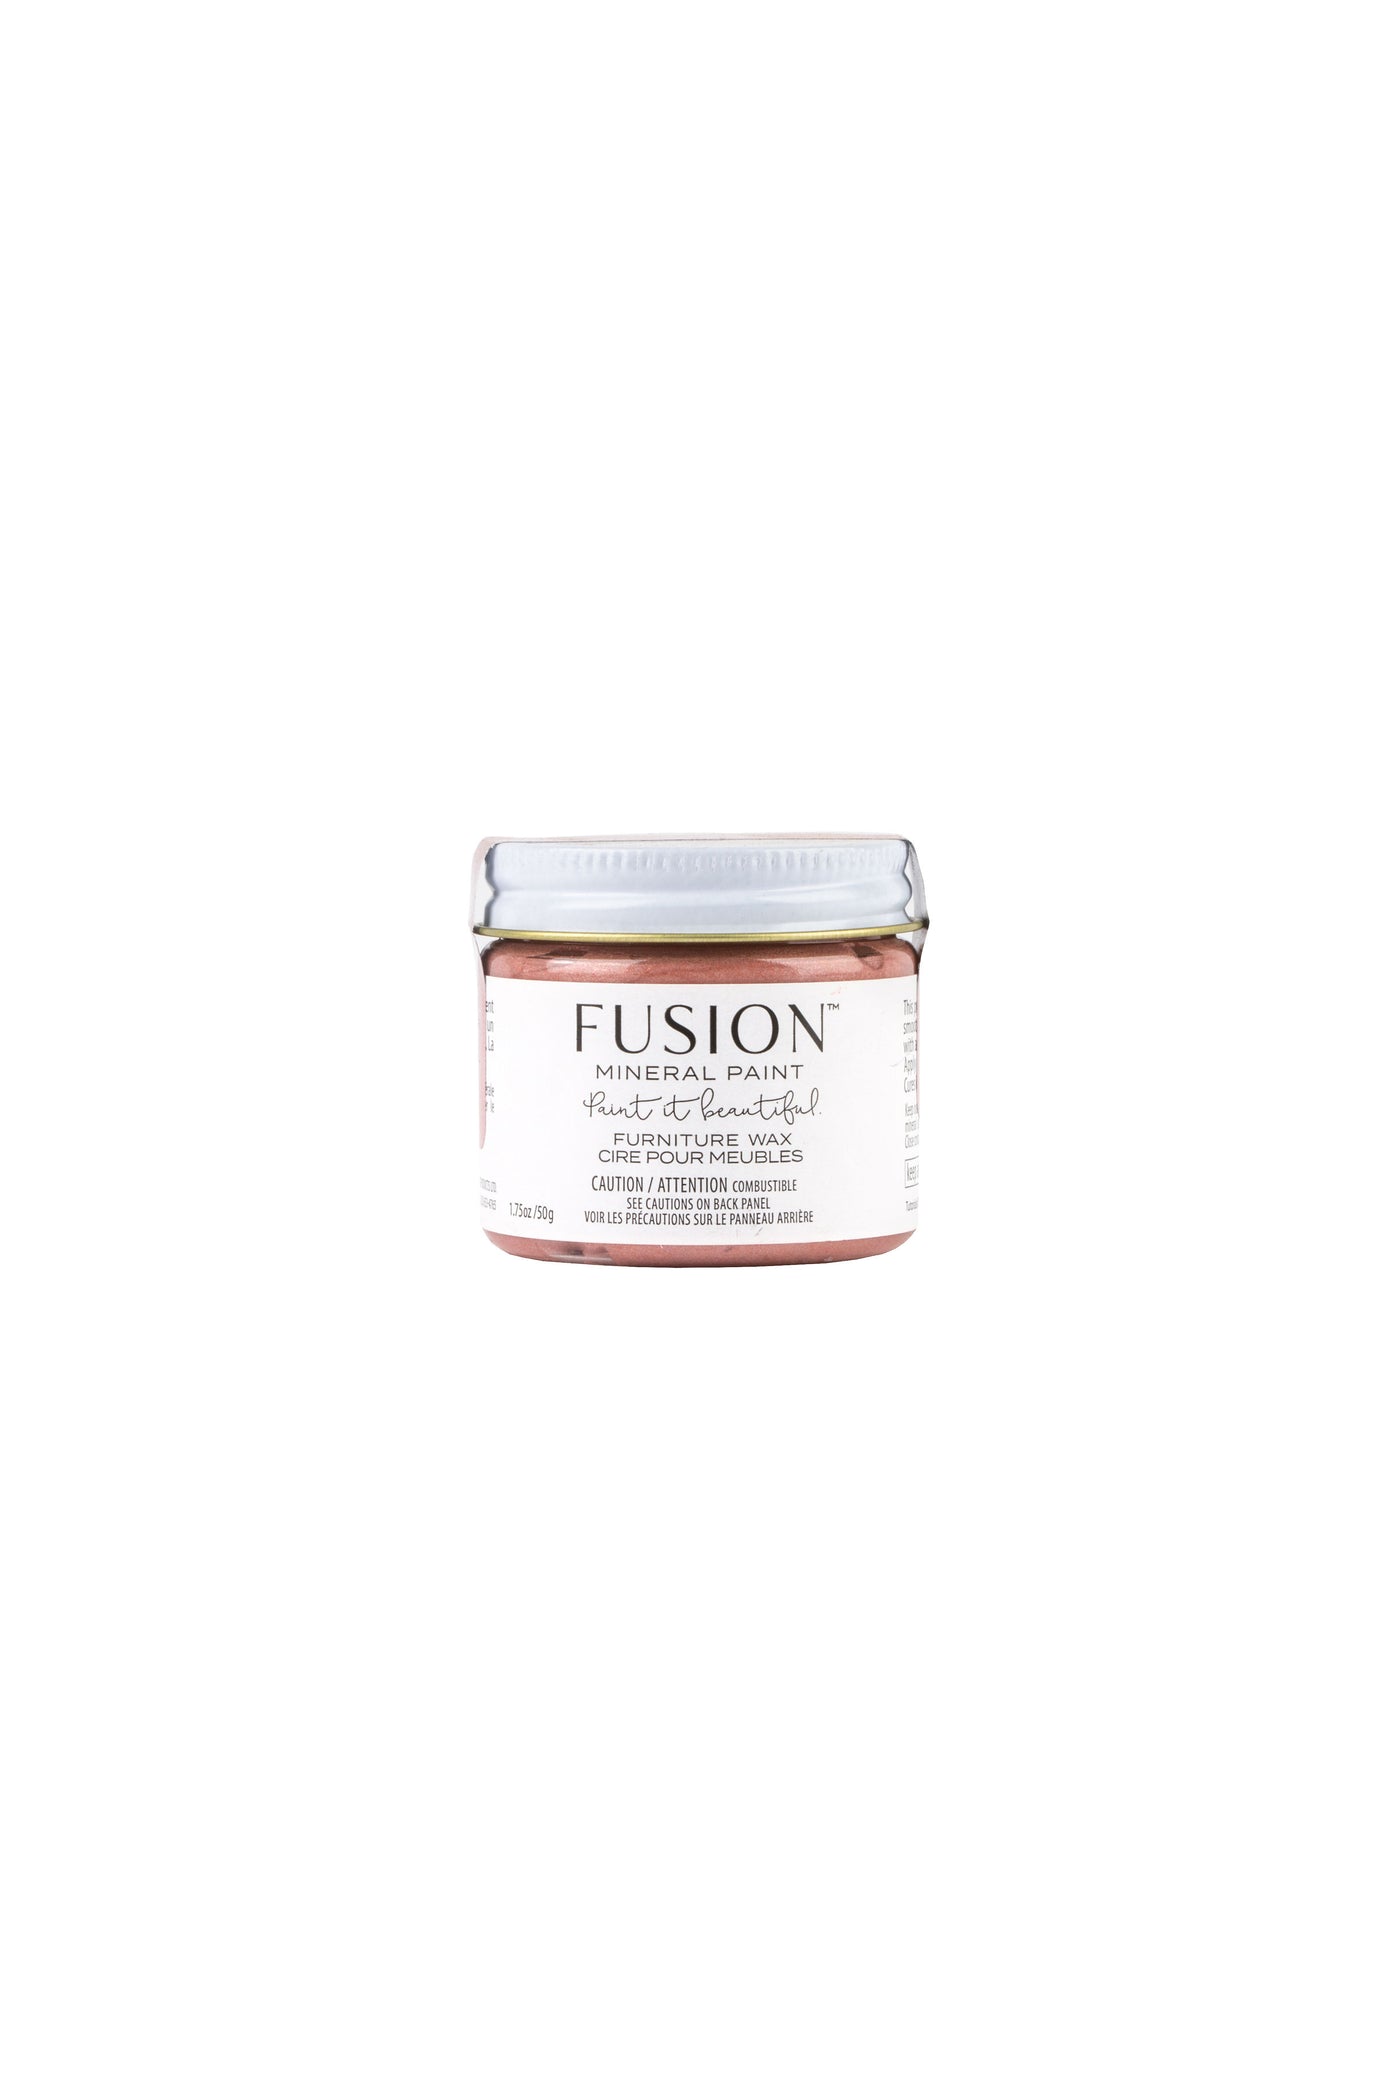 Rose Gold Fusion Furniture Wax 50g For the Love Creations